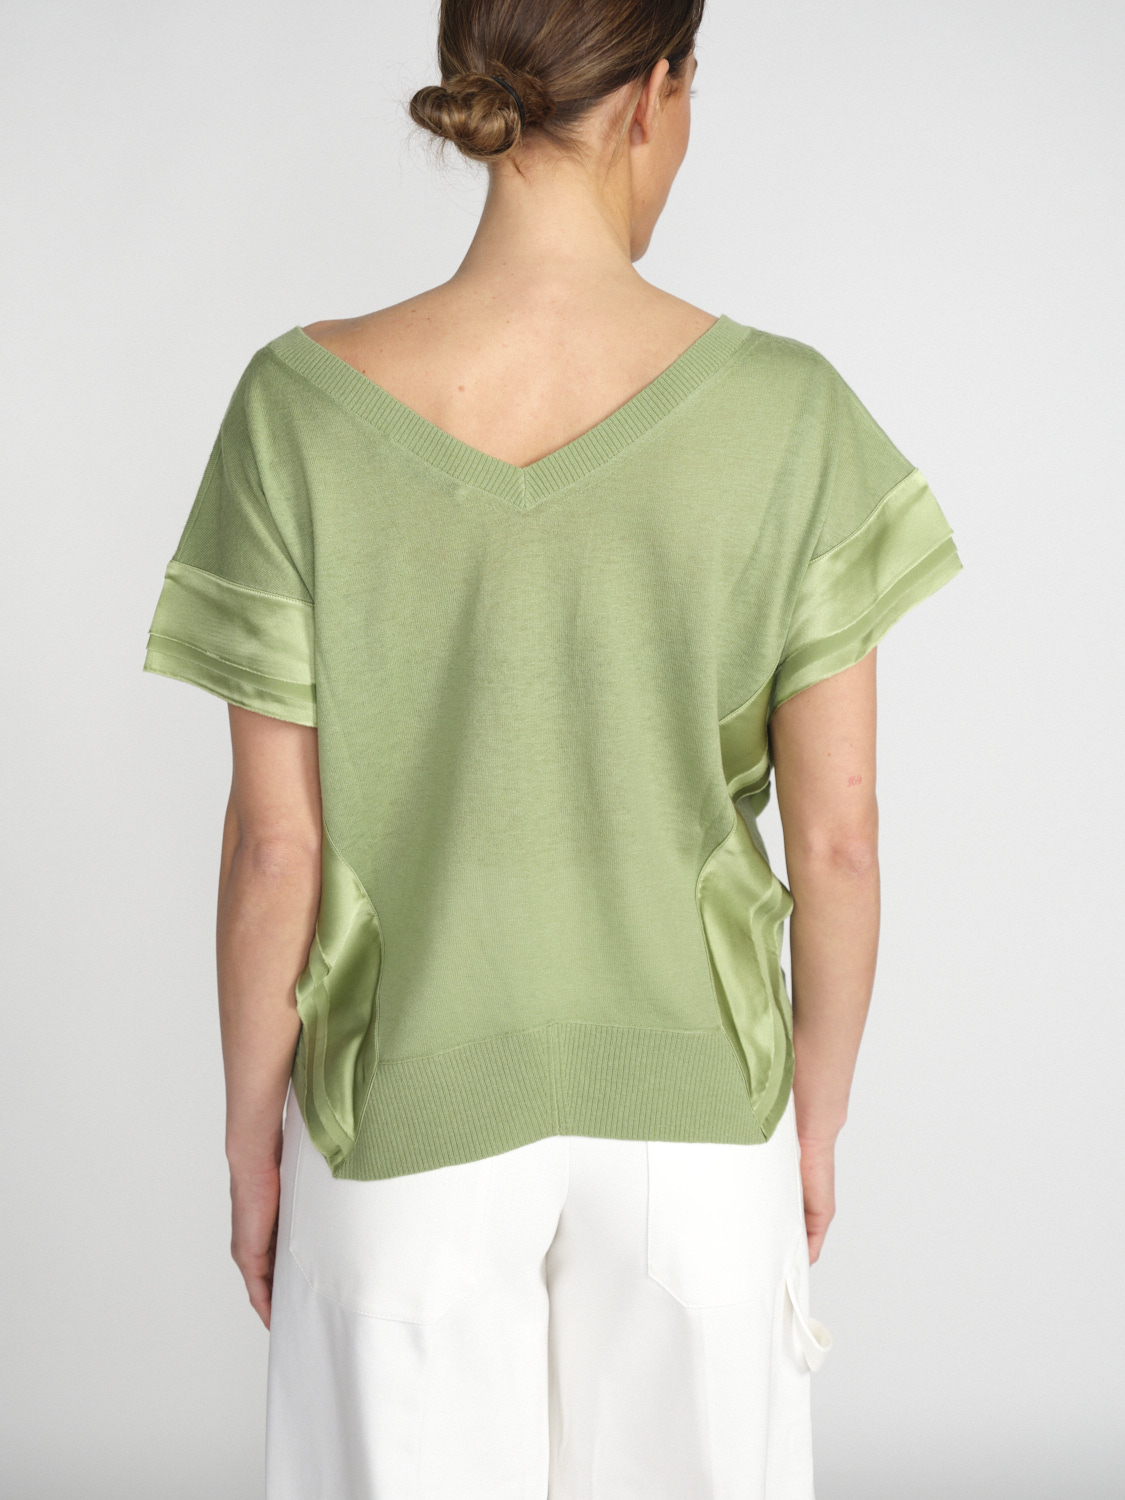 Dorothee Schumacher Delicate Statements – Oversized shirt made from a wool-cashmere mix  hellgrün S